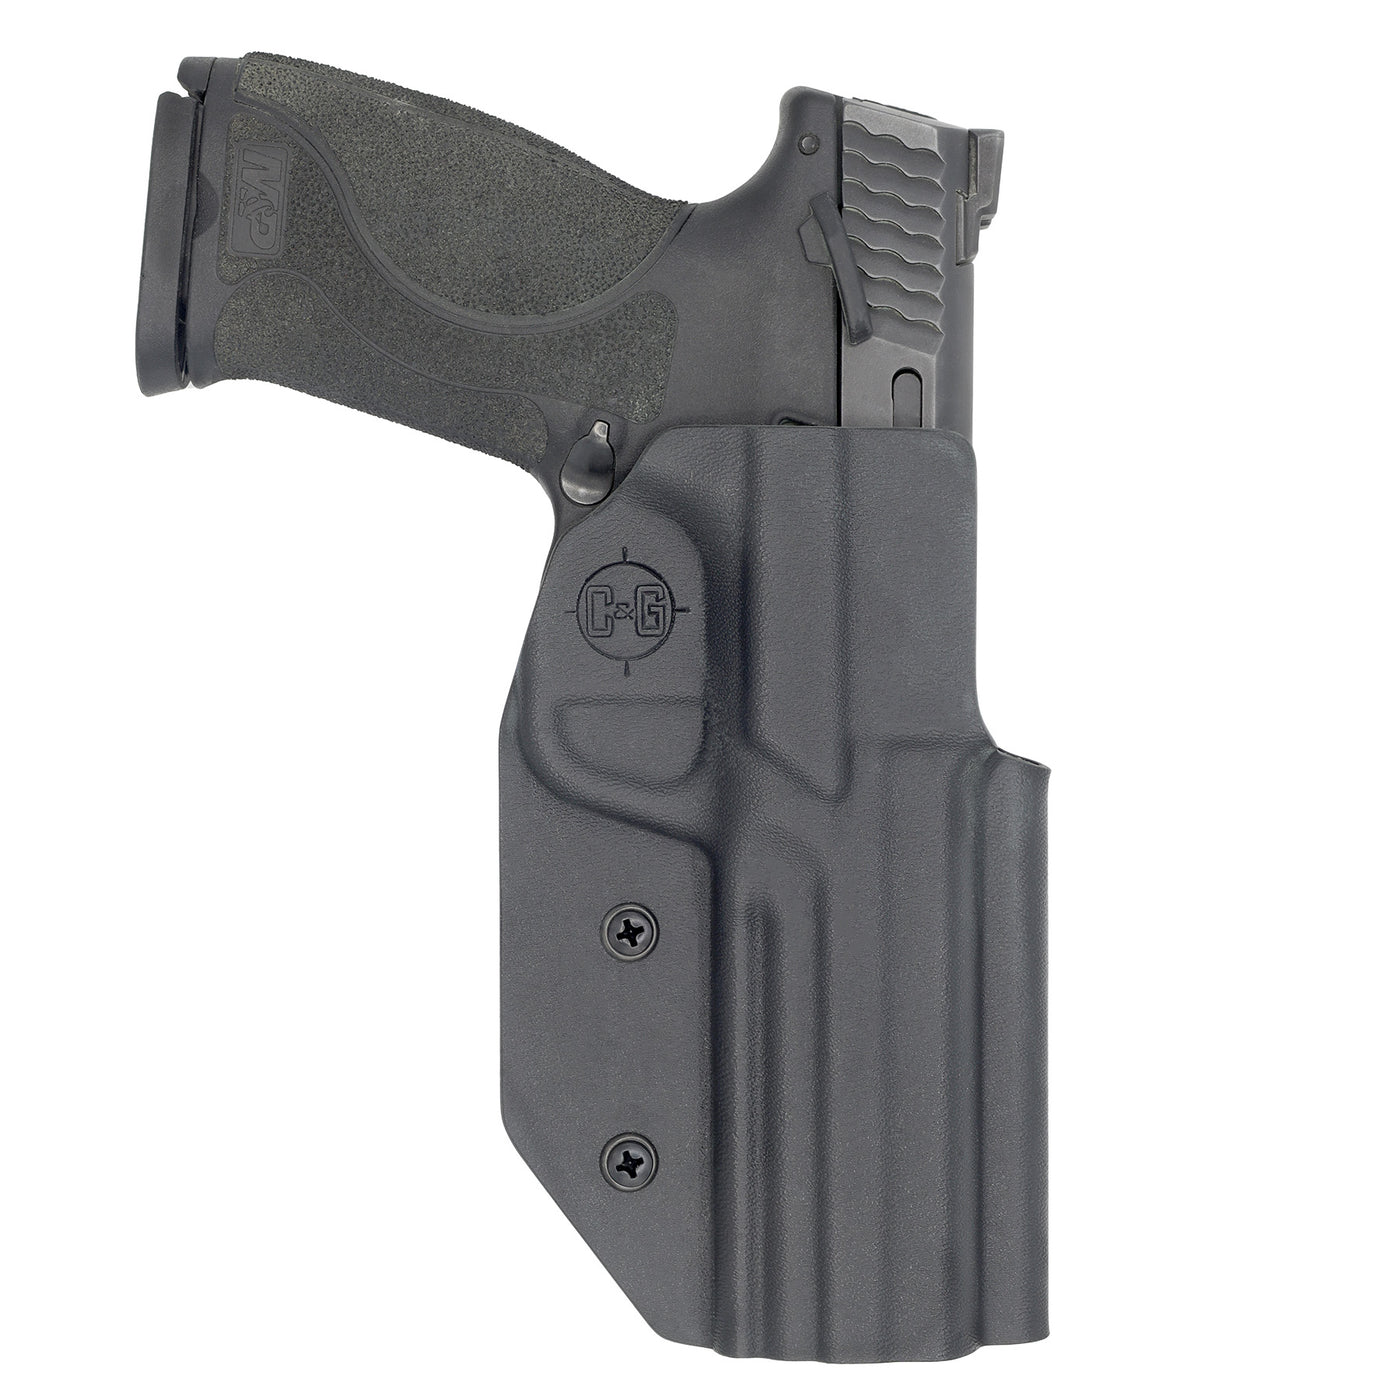 C&G Holsters Competition Holster that is IDPA, USPSA & 3-GUN legal for Smith and Wesson M&P 5" 9 40